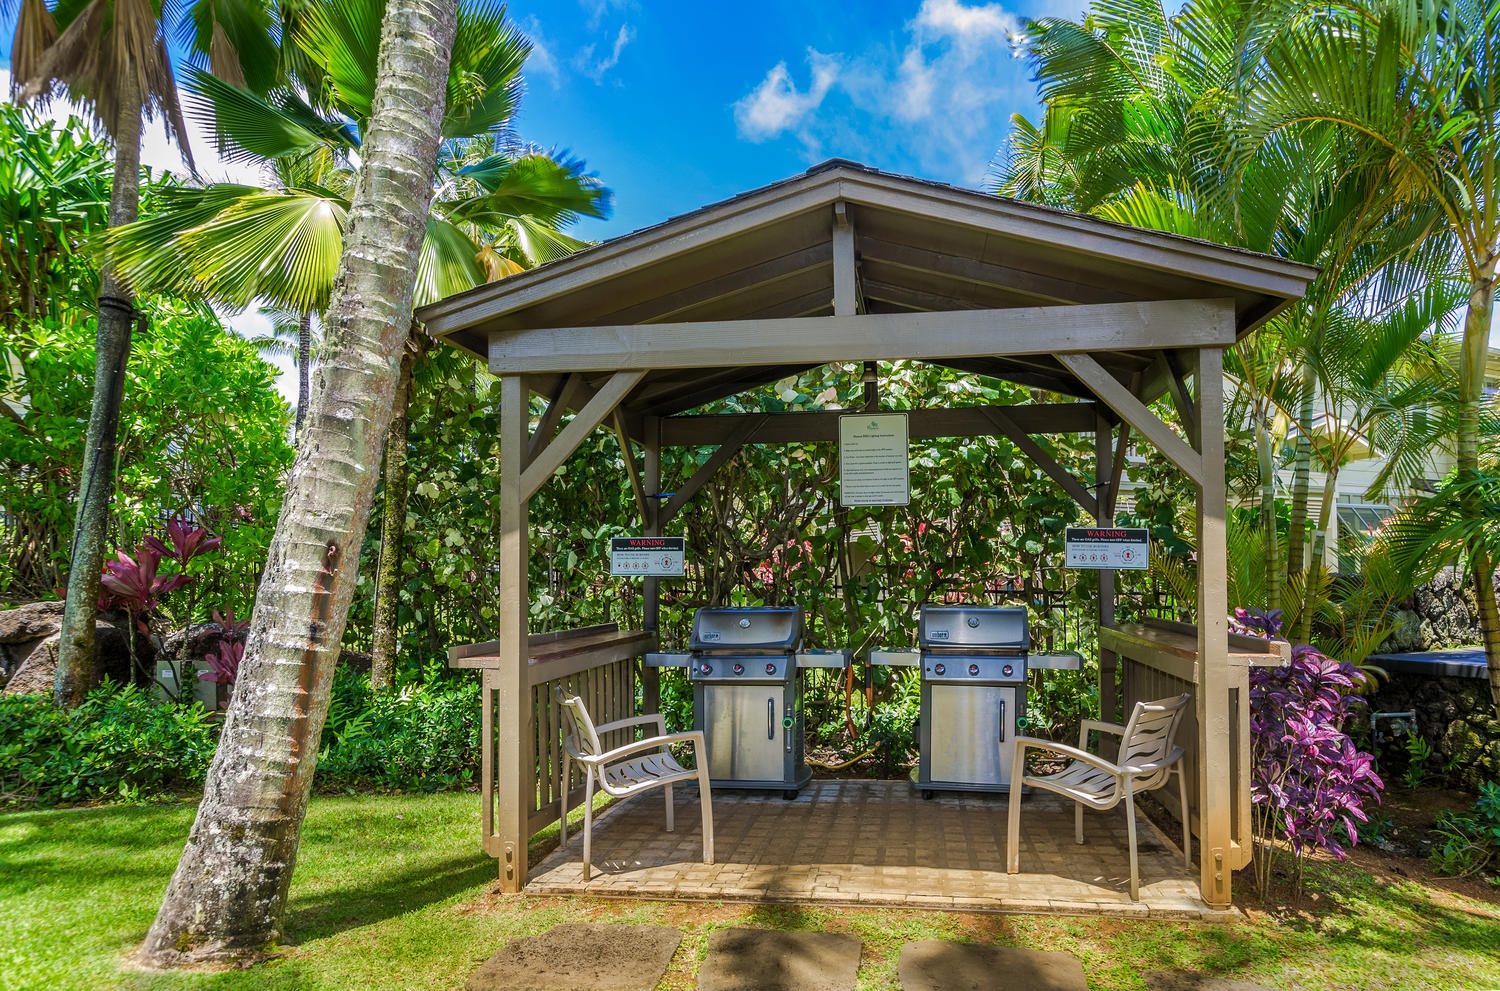 Princeville Vacation Rentals, Leilani Villa - Community BBQ area, shared space